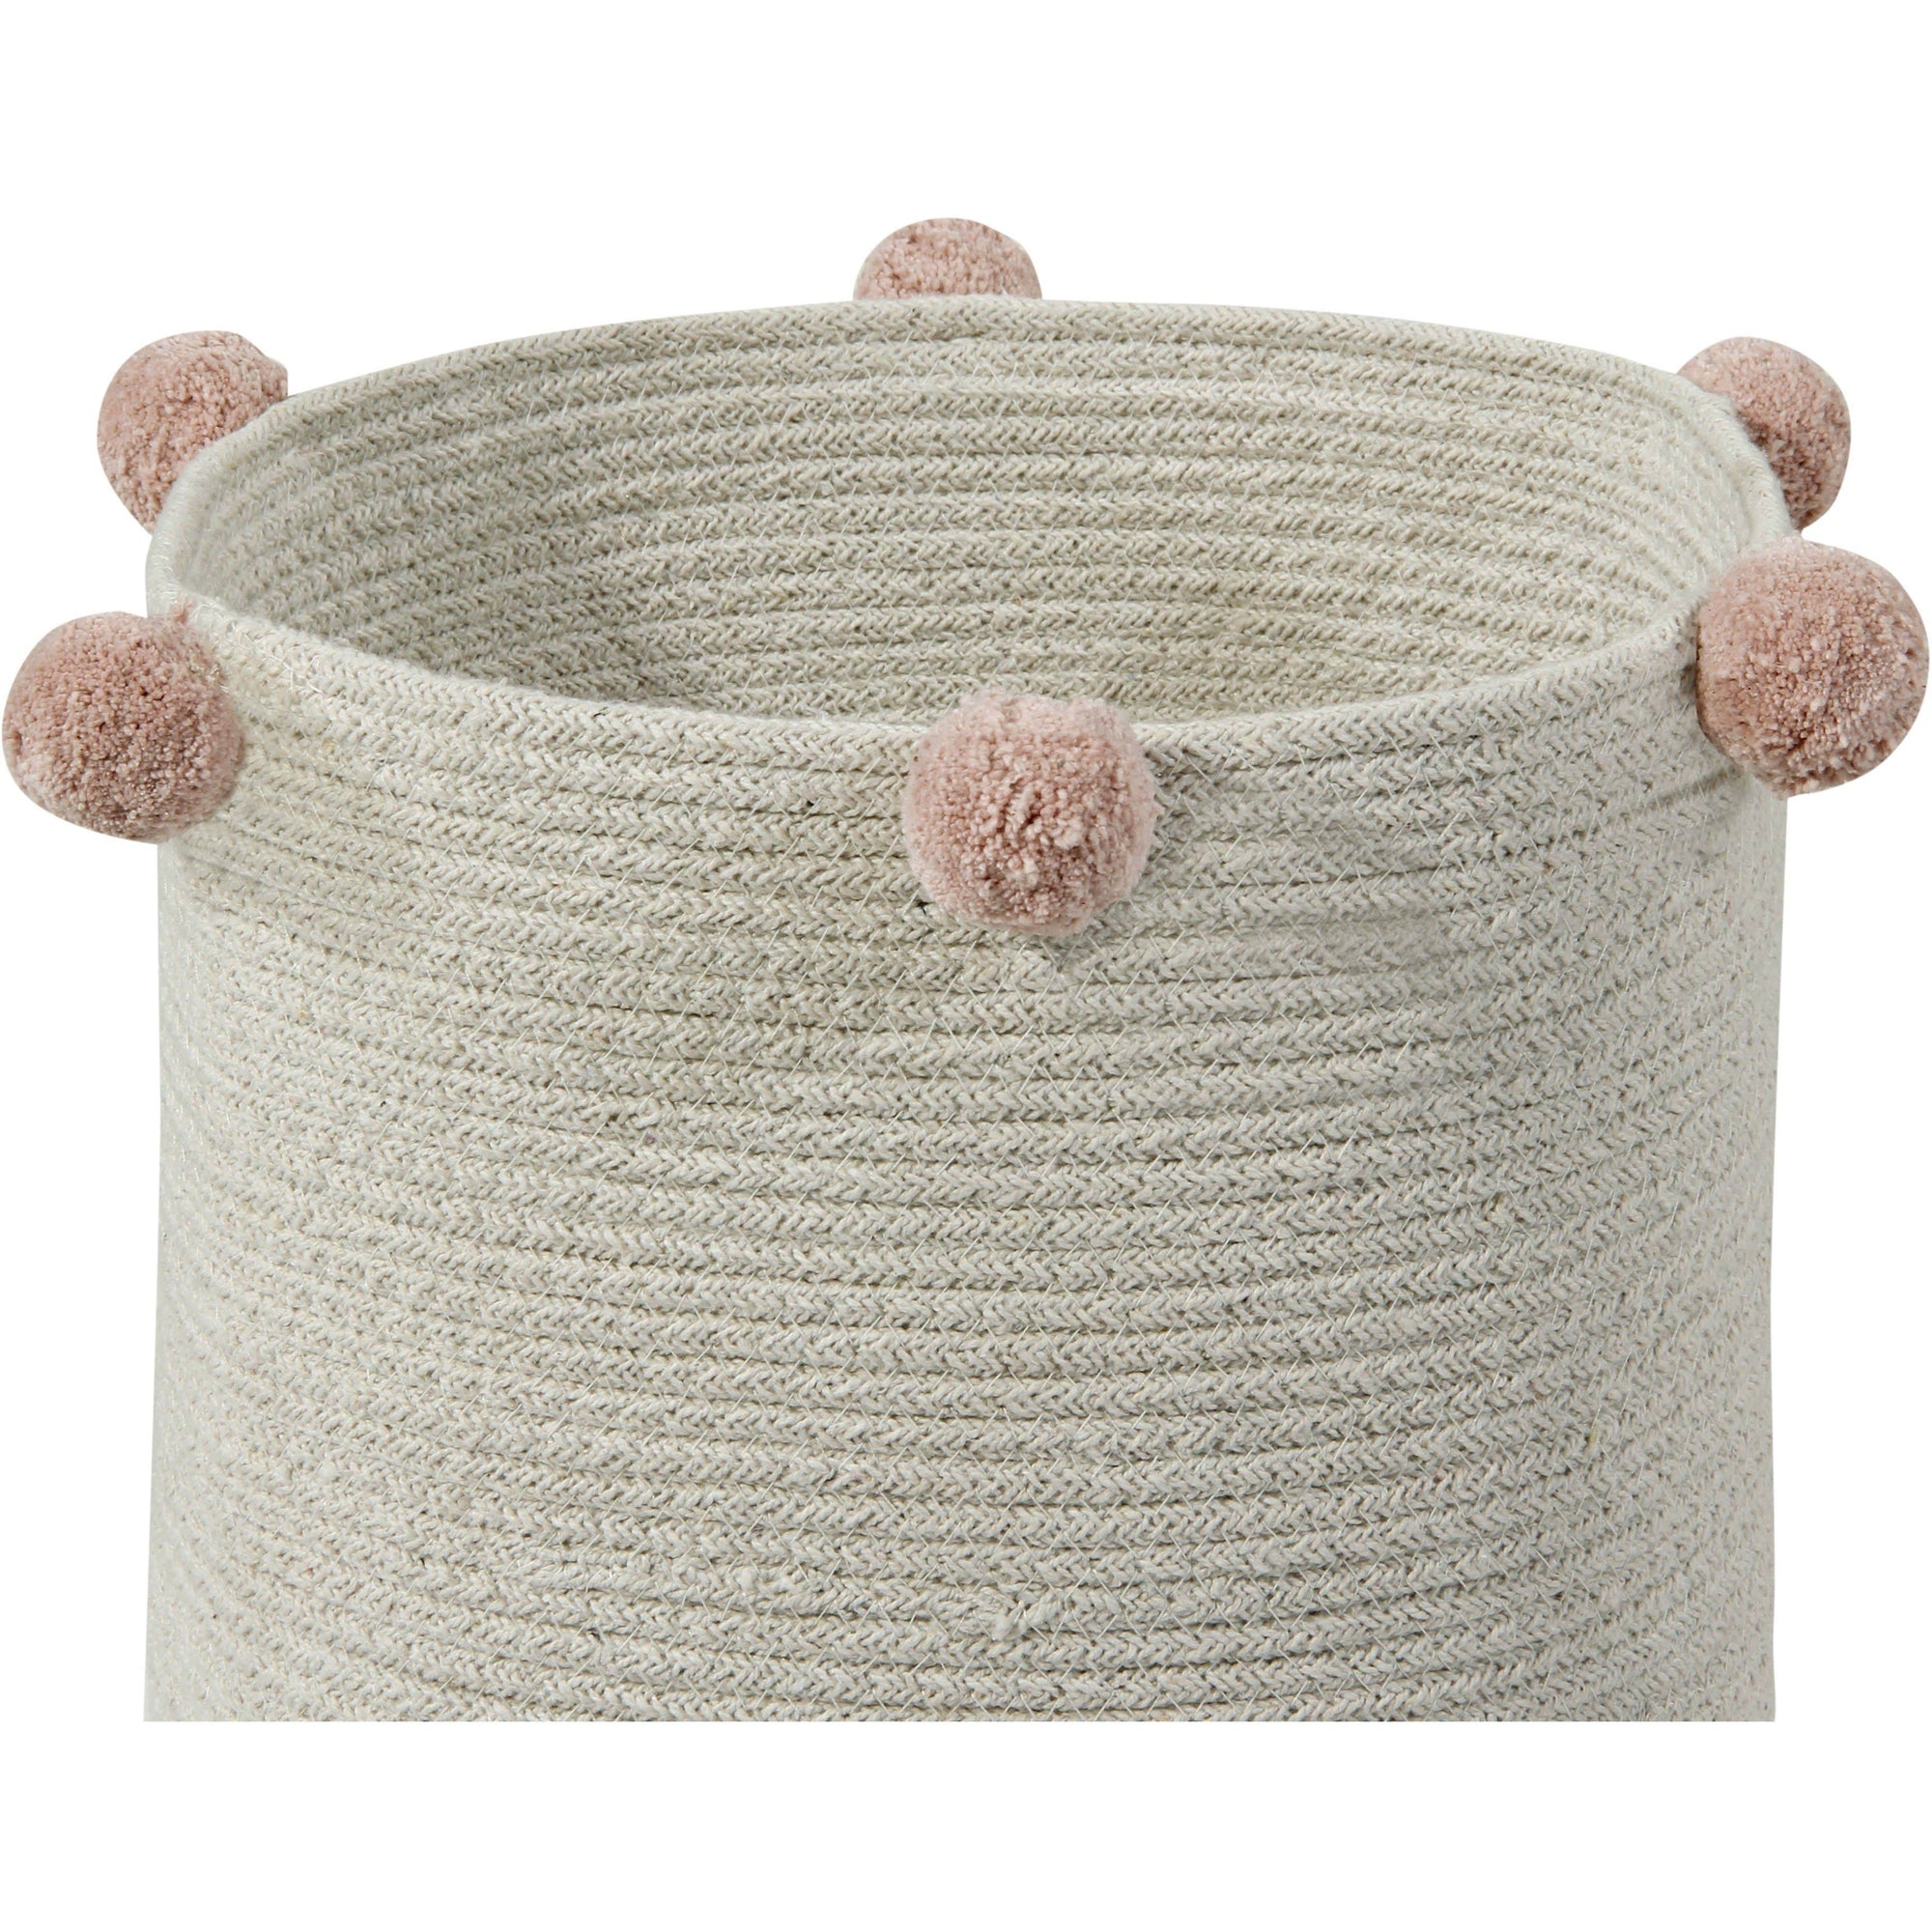 Rugs by Roo | Lorena Canals Bubbly Natural Nude Basket-BSK-NAT-NUDE